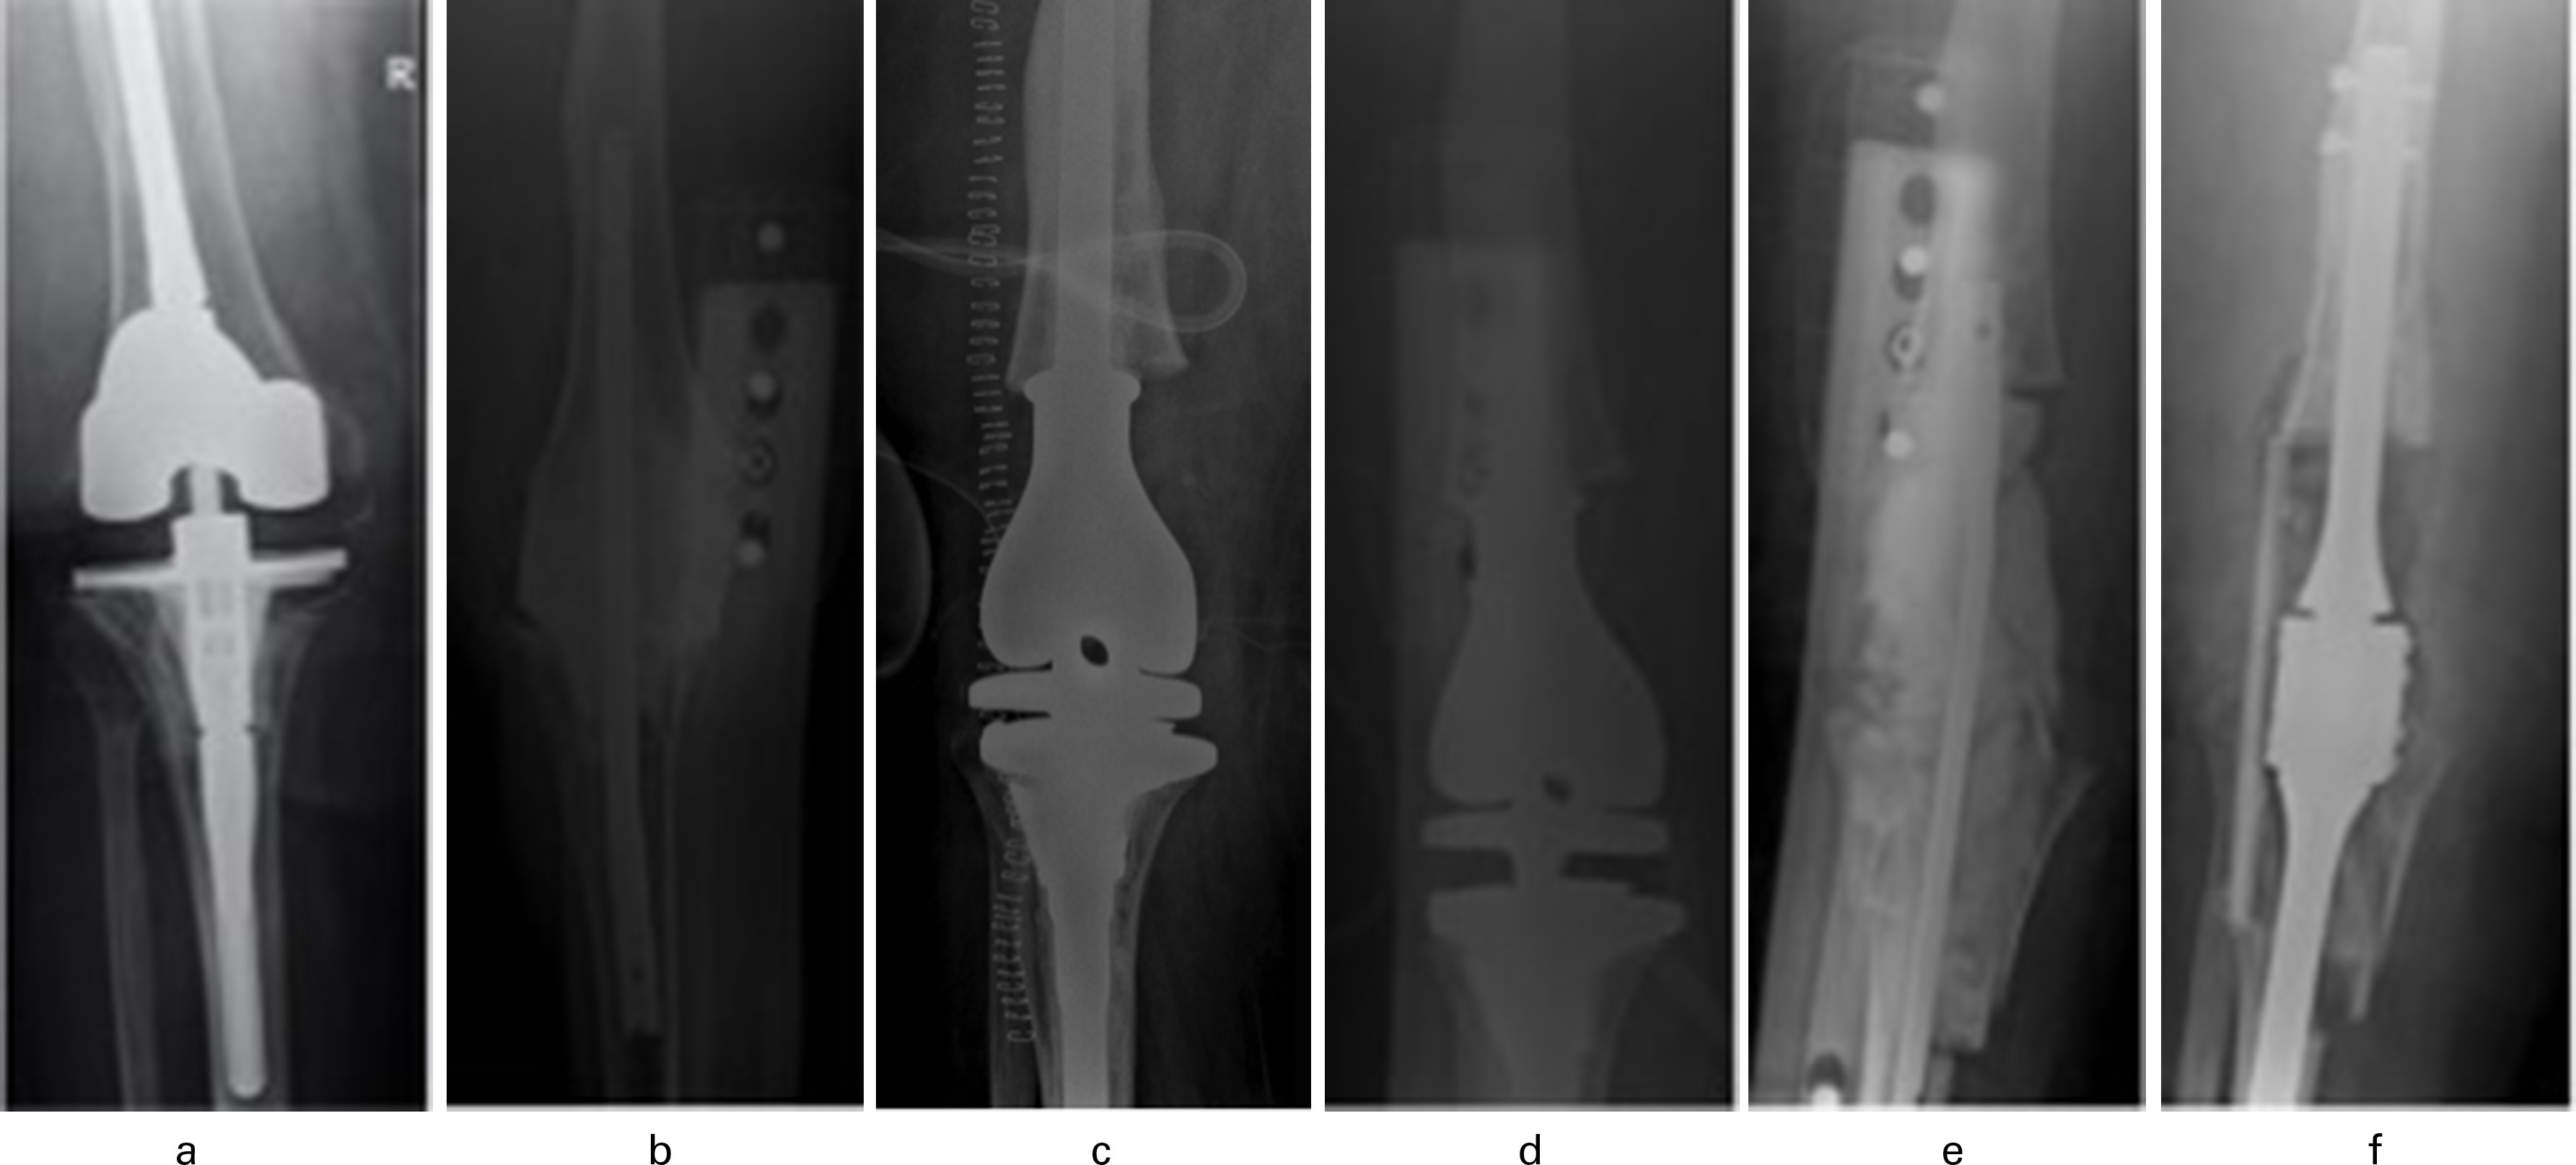 Fig. 5 
          Pre- and postoperative anteroposterior radiographs of a 60-year-old female with prior total knee arthroplasty (2009) and periprosthetic joint infection (PJI) and revision (2010) presenting with a) imaging of her existing total knee arthroplasty. b) Six years after the revision knee arthroplasty and multiple failed antibiotic courses for recurrent methicillin-sensitive Staphylococcus aureus PJI, the implant was explanted and an antibiotic cement spacer was placed. c) Four months later she underwent distal femoral arthroplasty (DFA). d) Due to suspected ongoing PJI she then underwent a polyethylene exchange and irrigation and debridement three weeks later. e) Without resolution of the PJI, she underwent DFA explantation and placement of antibiotic spacer after another two months and, lastly, f) after an additional three months she underwent arthrodesis of the right knee. There have been no signs of PJI since fusion.
        